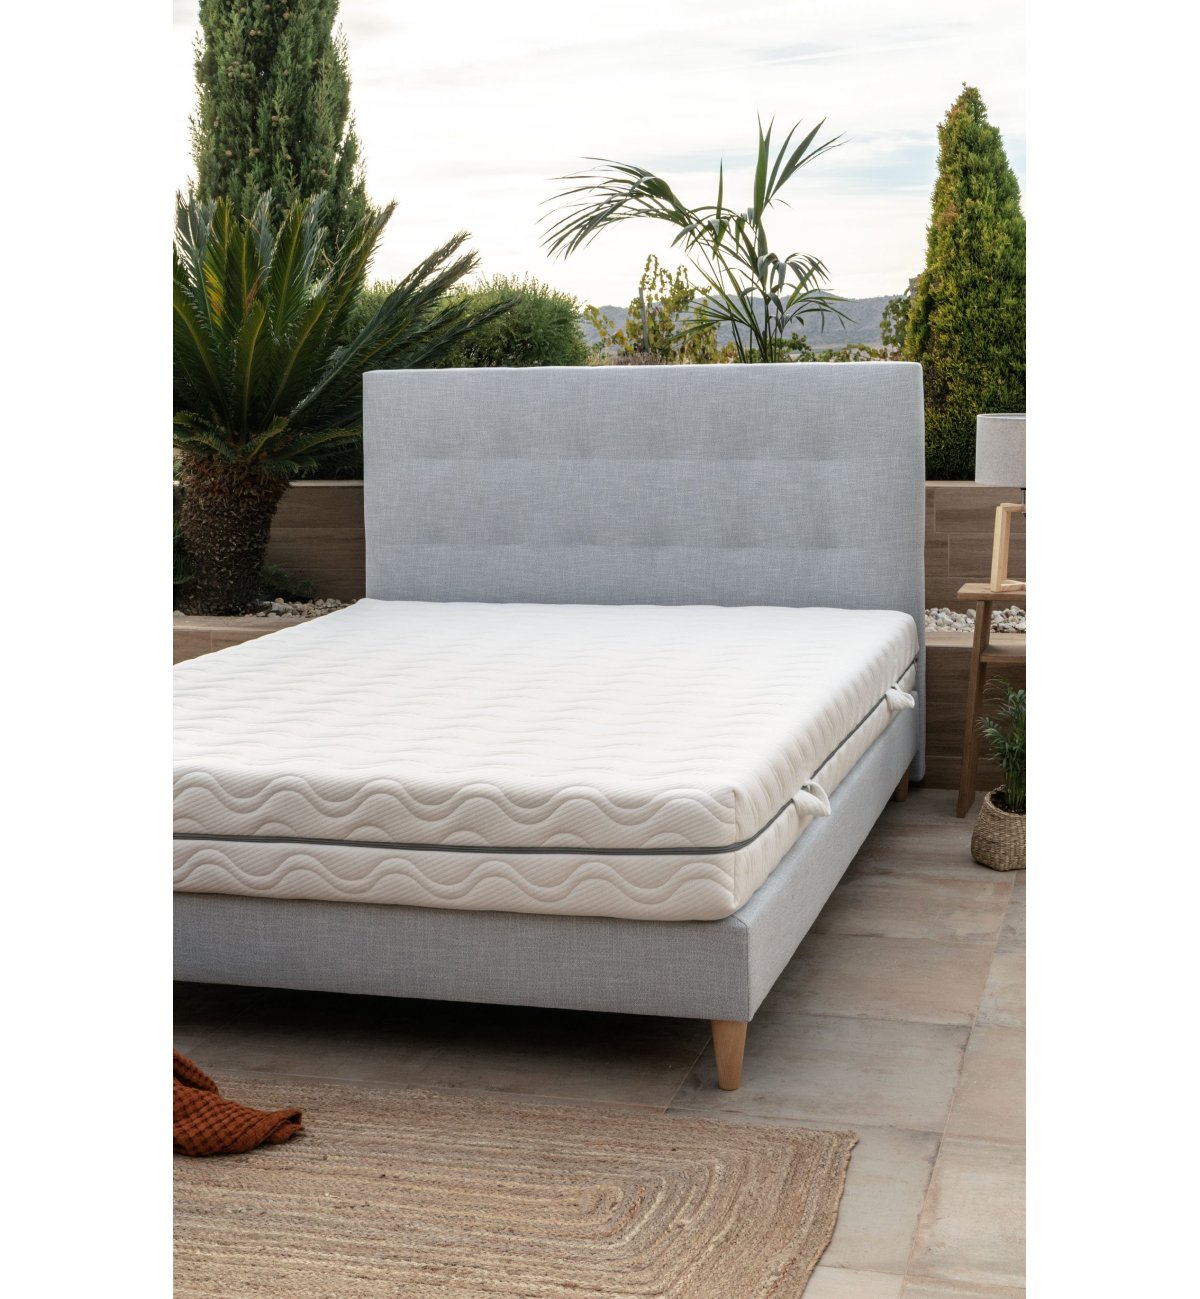 Adult COCOLATEX® mattress with TENCEL™ air-conditioning cover